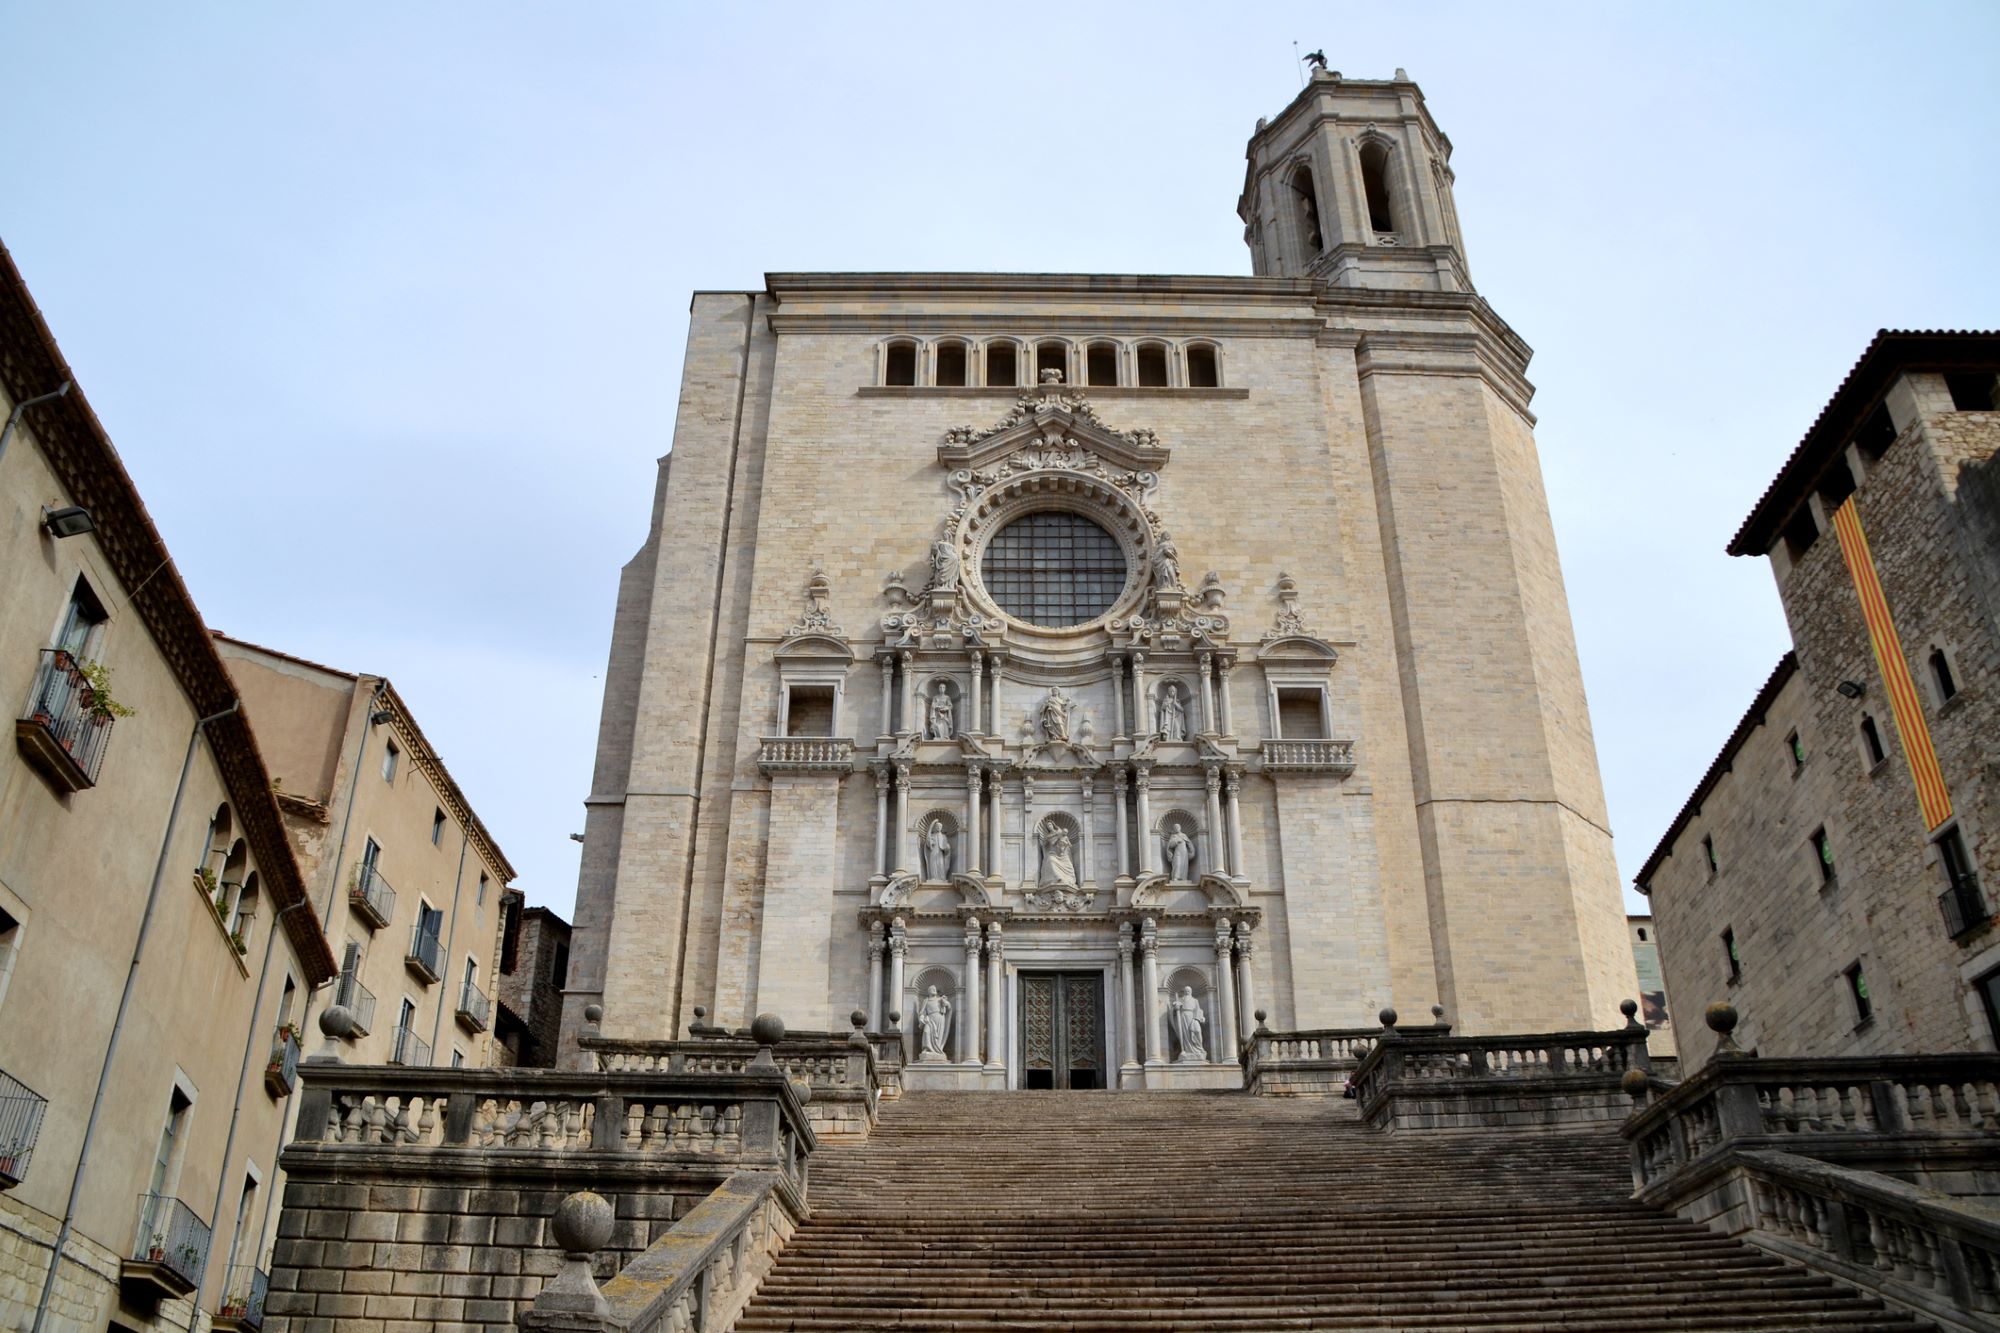 Game of Thrones Filming Locations - Girona Cathedral